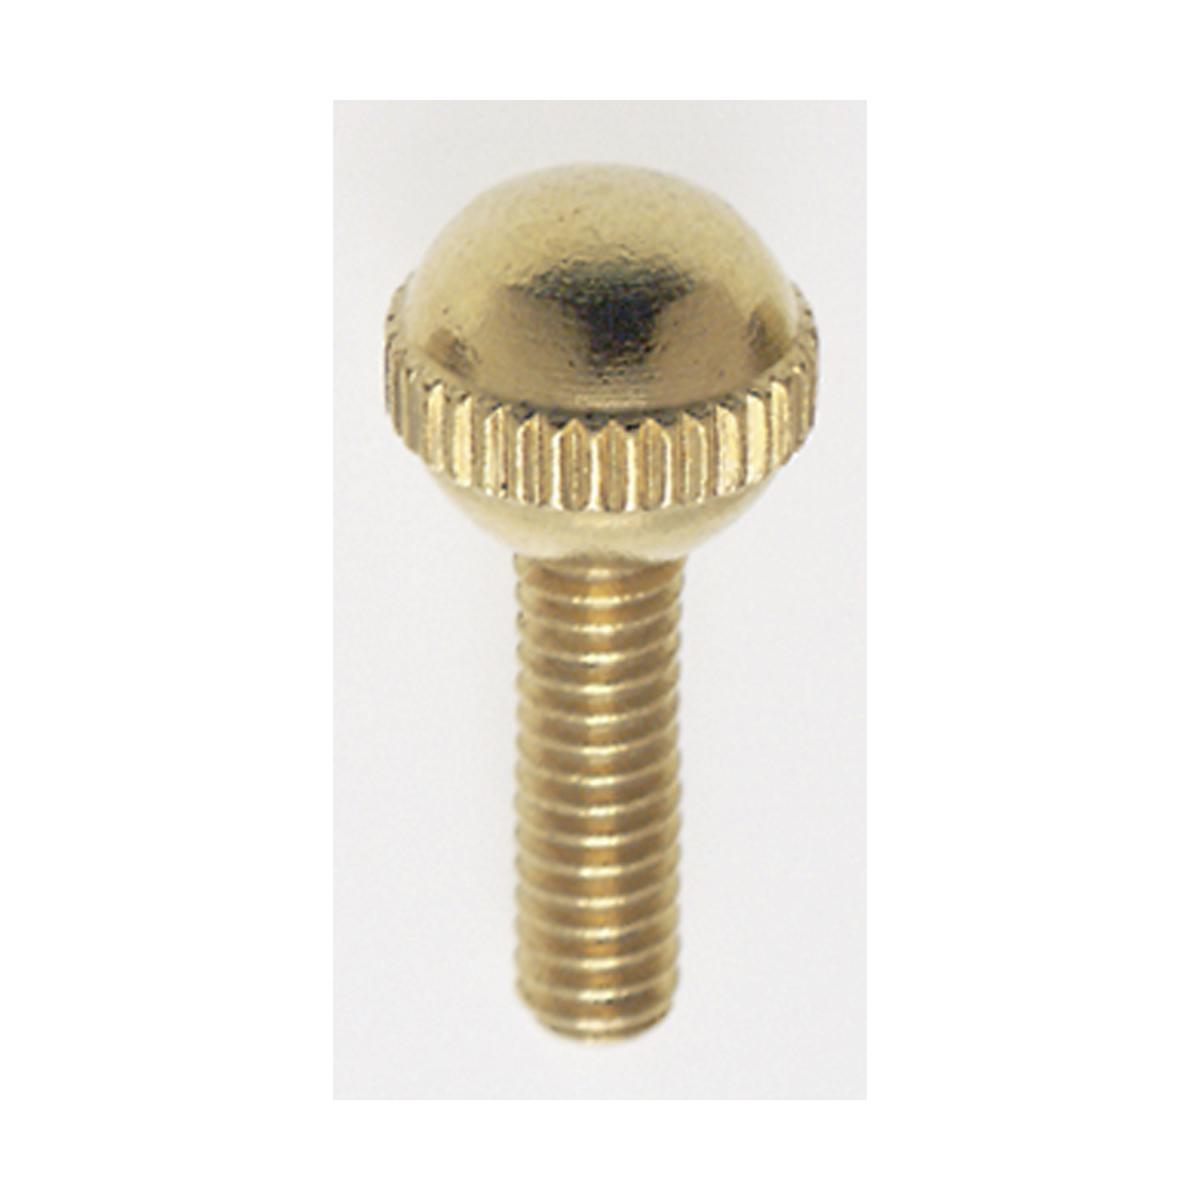 Satco 90-036 Solid Brass Thumb Screw Burnished and Lacquered 8/32 Ball Head 1/2" Length